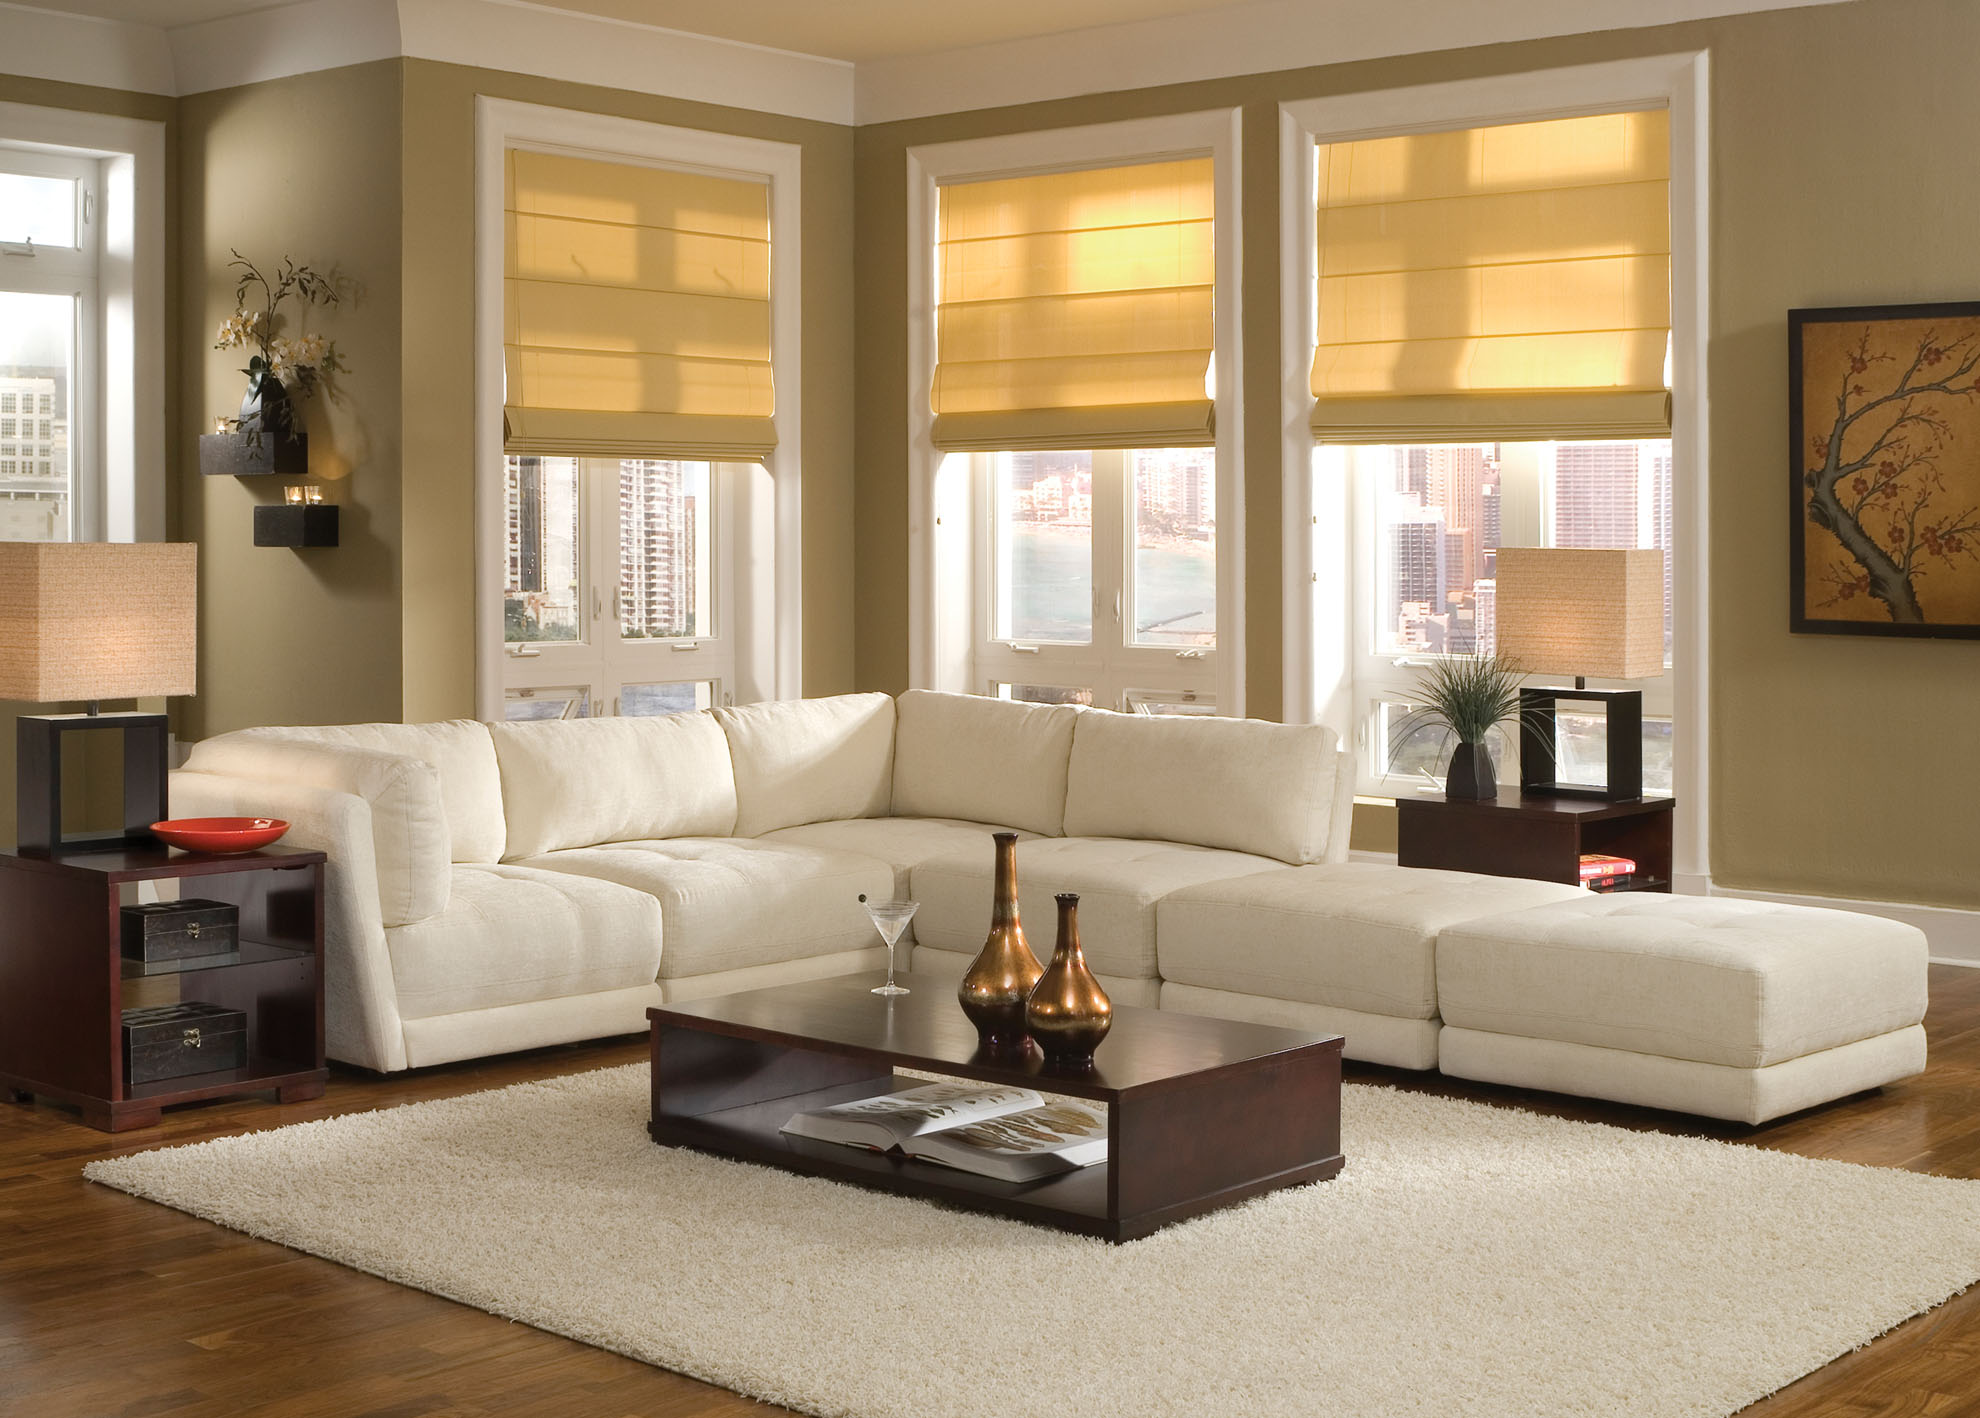 White Sofa Design Ideas & Pictures For Living Room